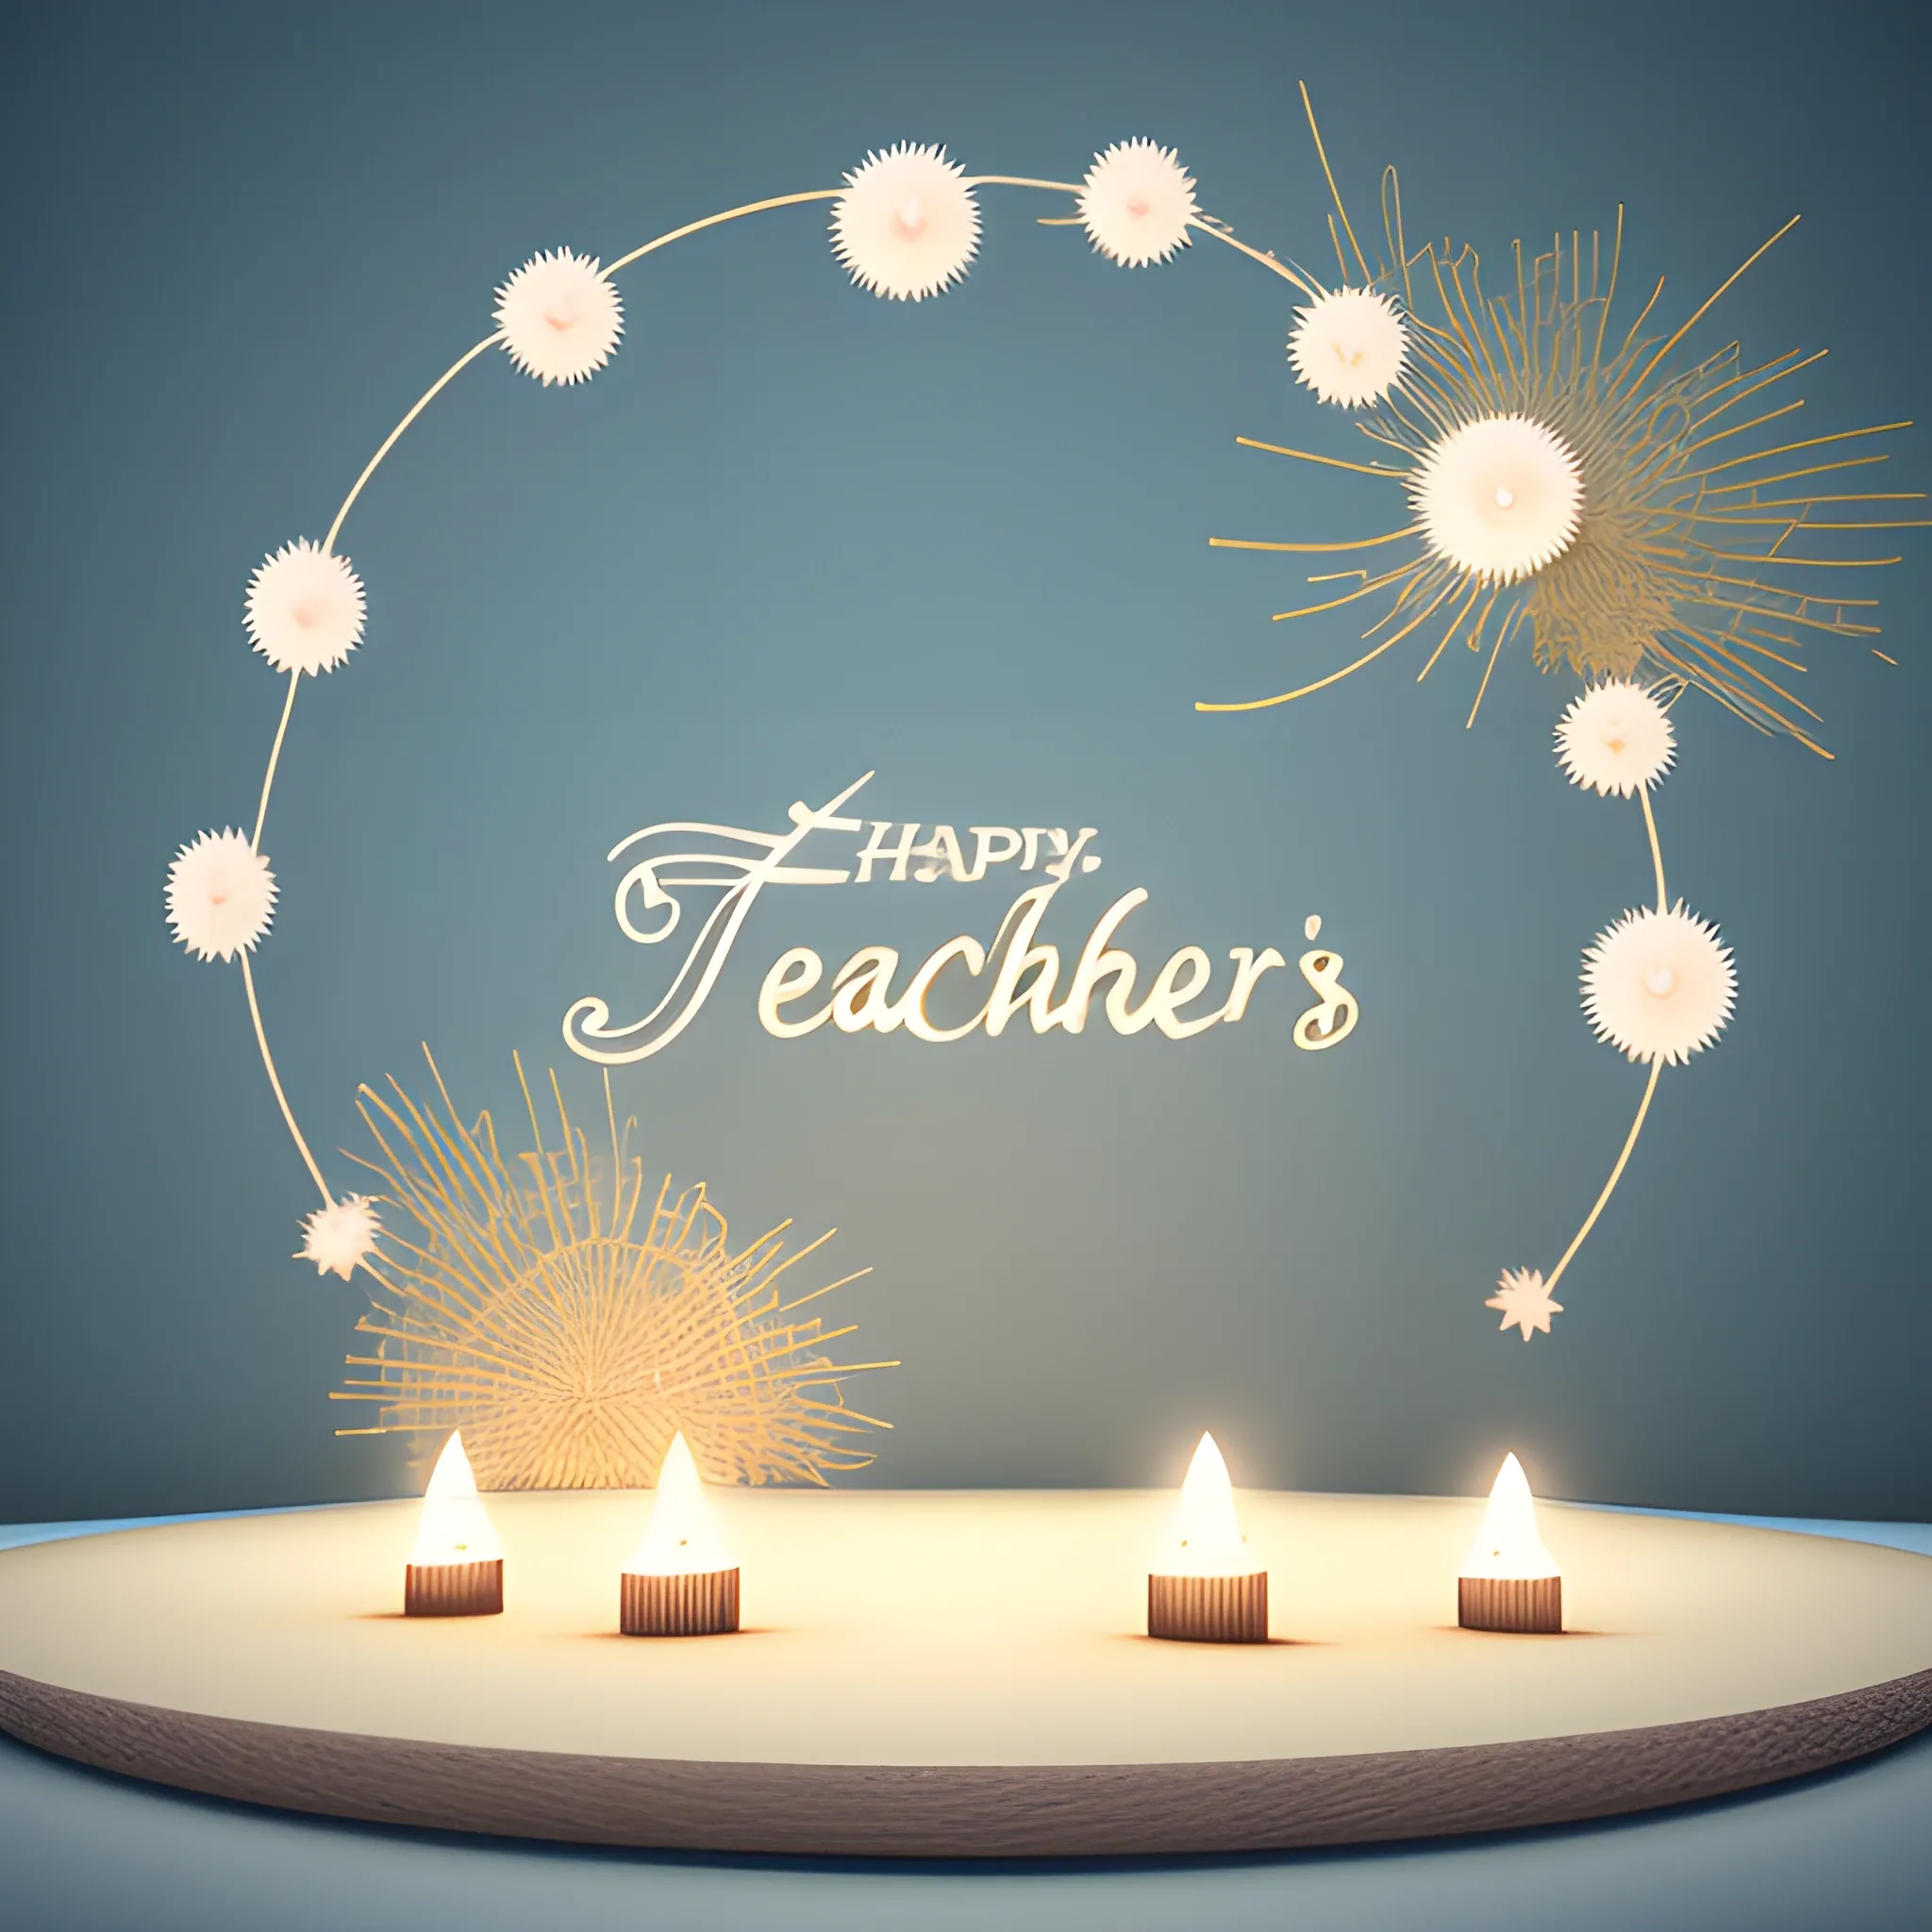 Teachers' day 3d animated image, natural, stunning 
wish by "Ariful"